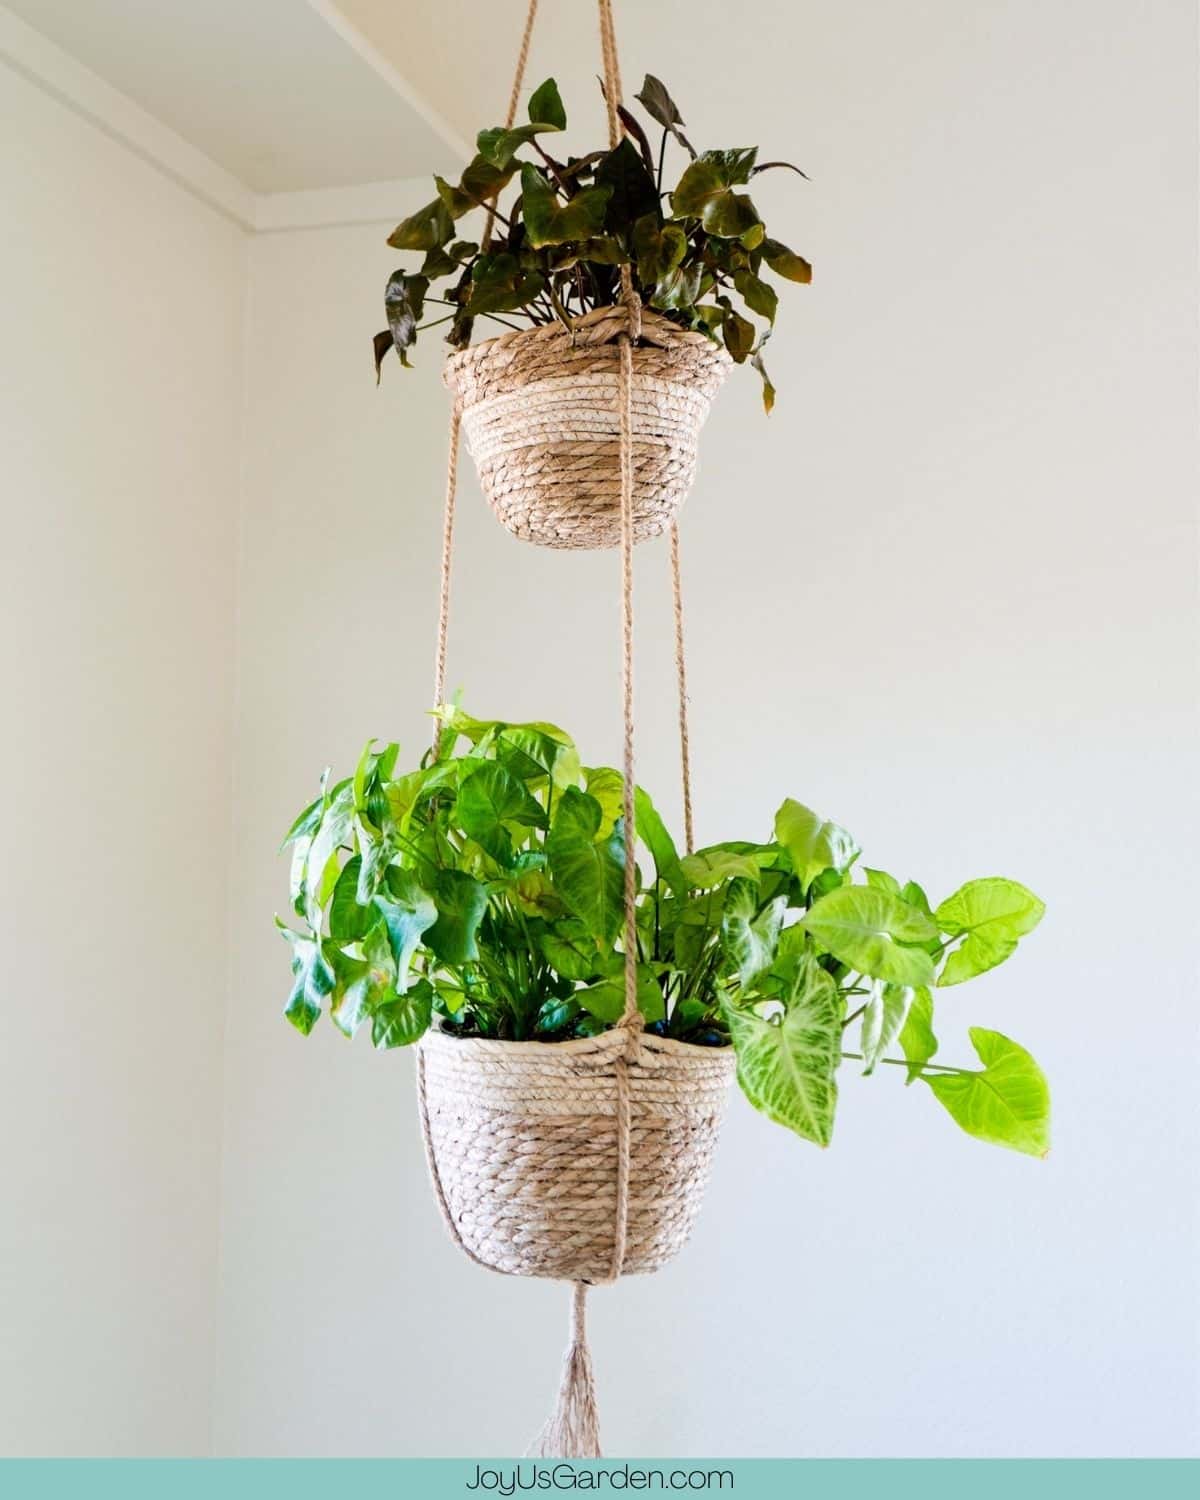 Two houseplants hanging from the ceiling in a double rope basket.